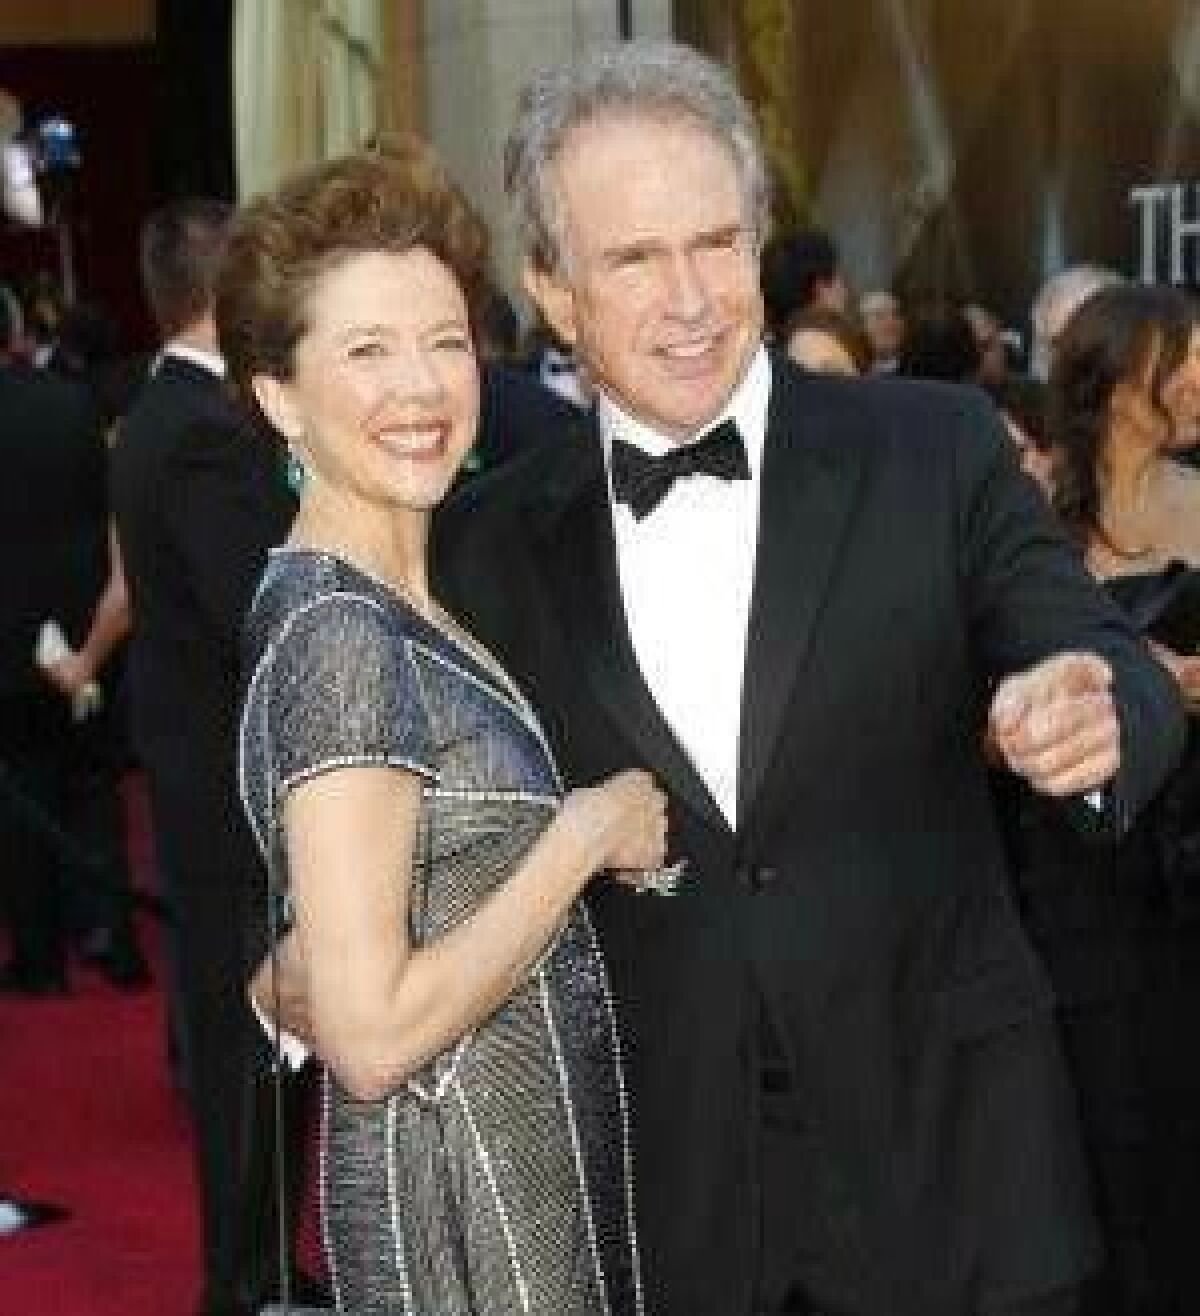 Annette Bening and Warren Beatty arrive at the 83rd Annual Academy Awards at the Kodak Theatre in Los Angeles on Feb. 27, 2011.